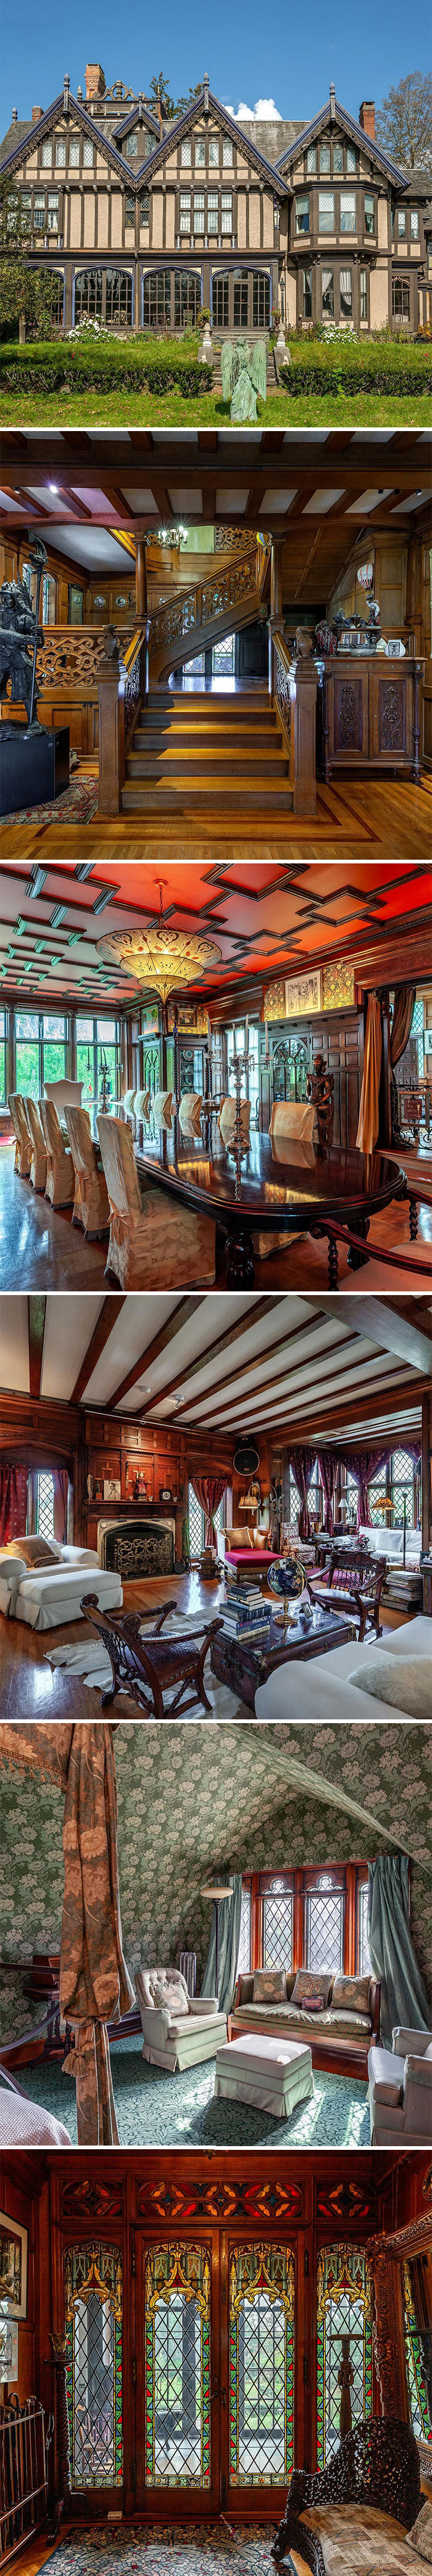 Here’s An 1860 43-Room Elizabethan Style Manor In Pawling, NY On 25.5 Acres That Per The Listing Comes With “Two Caretaker Homes, A Carriage House With Groom's Quarters, A Yoga Studio, A 12,000 Sq. Ft. Stable, Greenhouse And More” $6,500,000